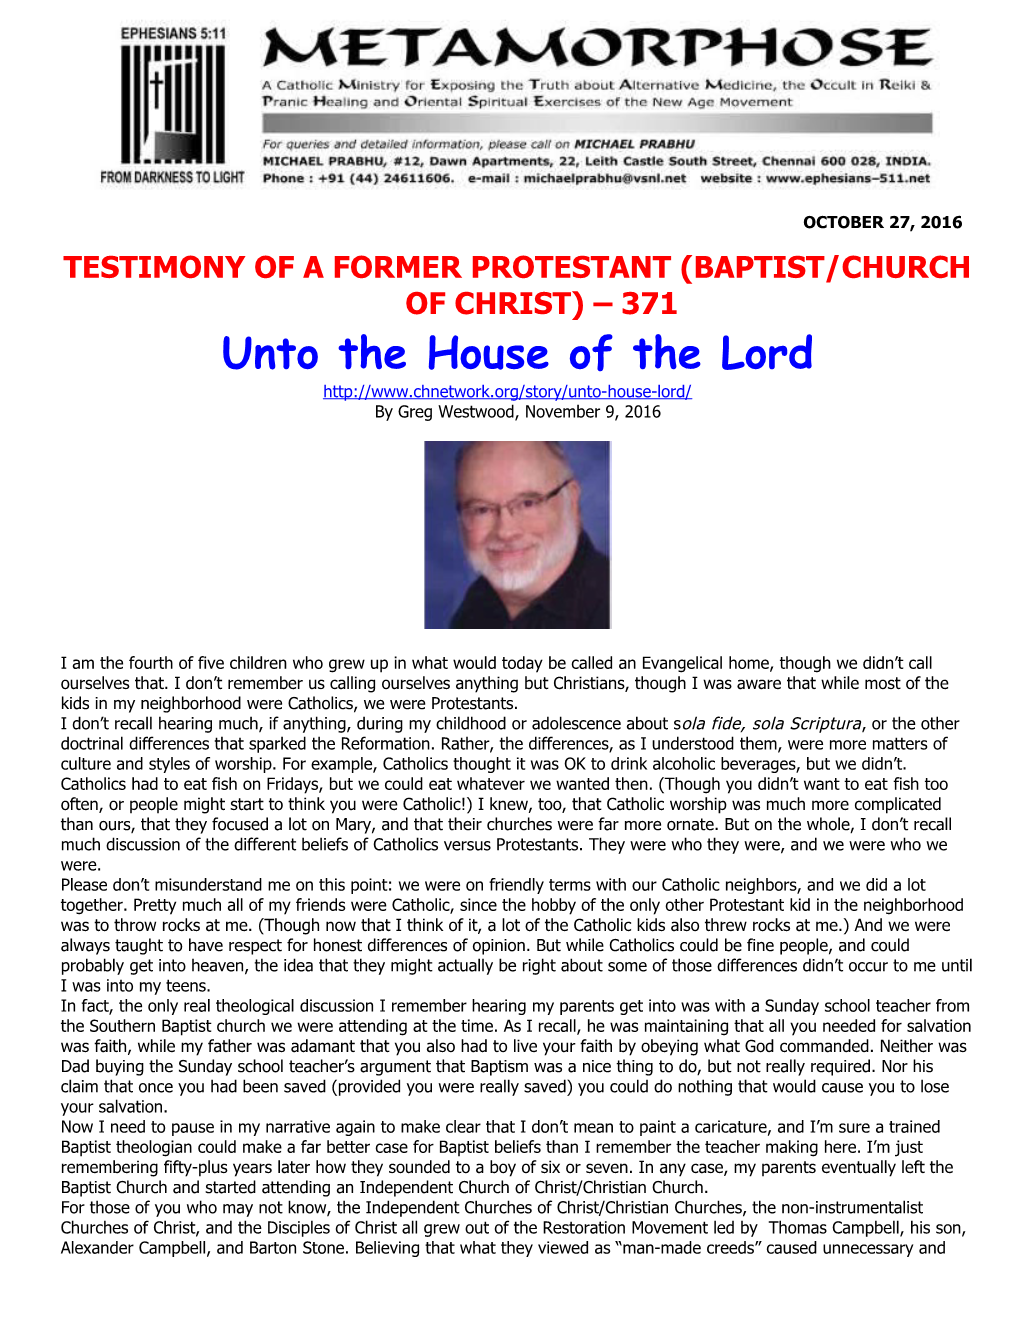 Testimony of a Former Protestant (Baptist/Church of Christ) 371